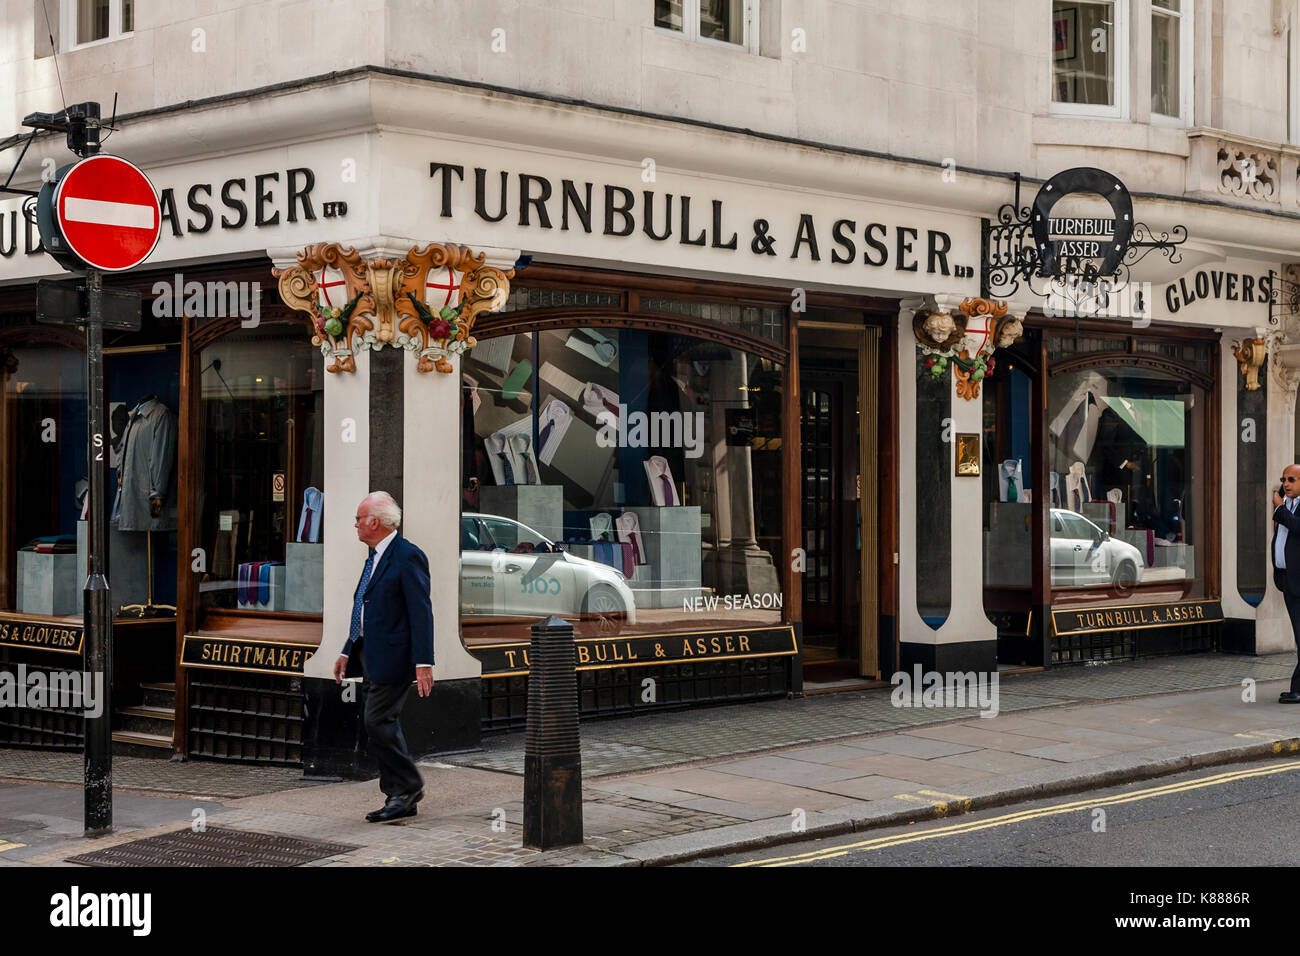 Turnbull & Asser High Resolution Stock Photography and Images - Alamy